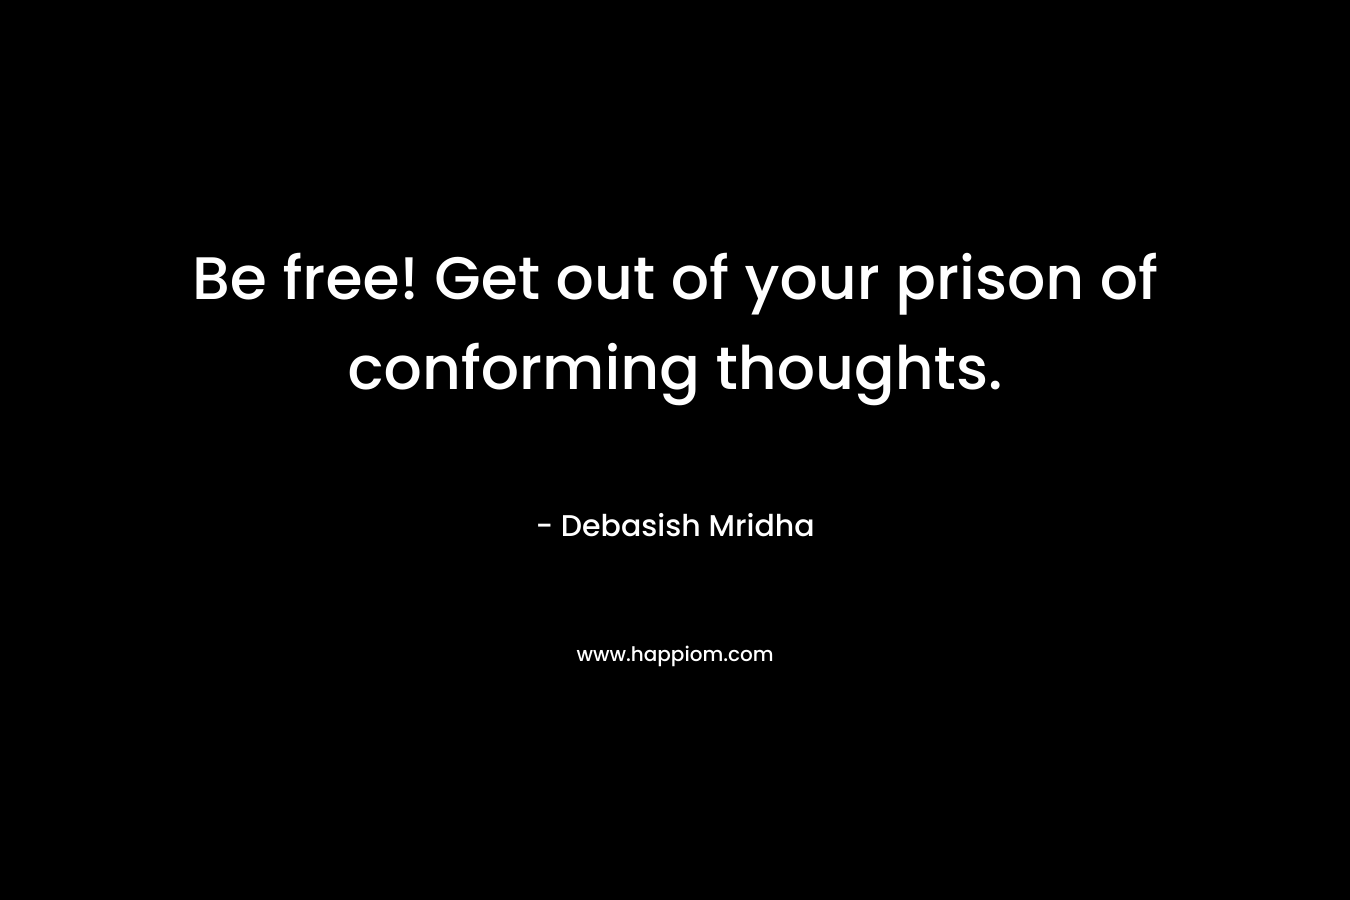 Be free! Get out of your prison of conforming thoughts. – Debasish Mridha